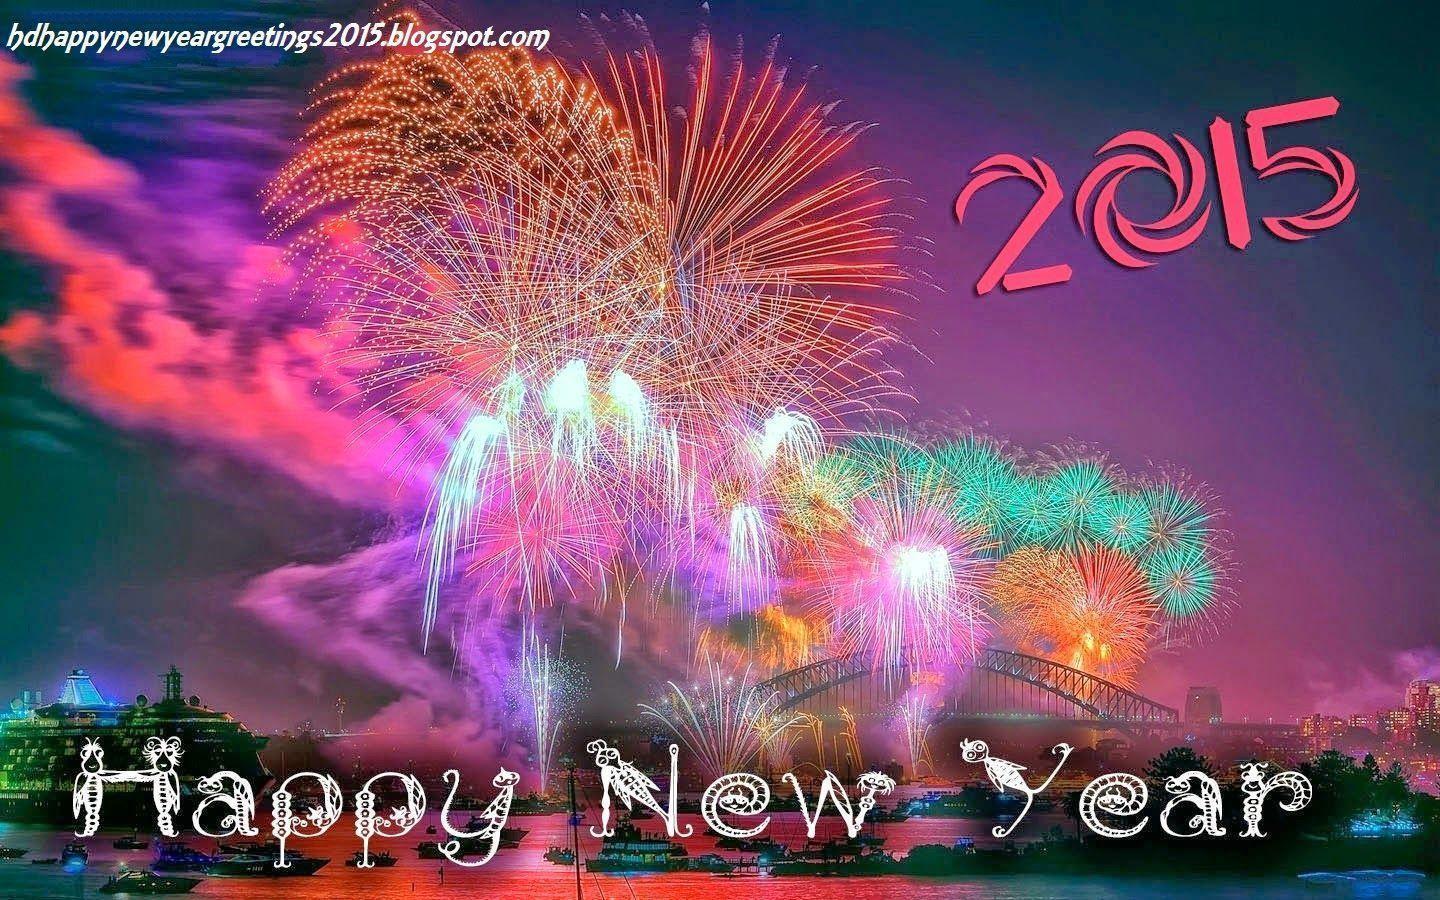 Top Best HD Happy Newyear Wallpaper 2015 Greetings Wishes. Happy